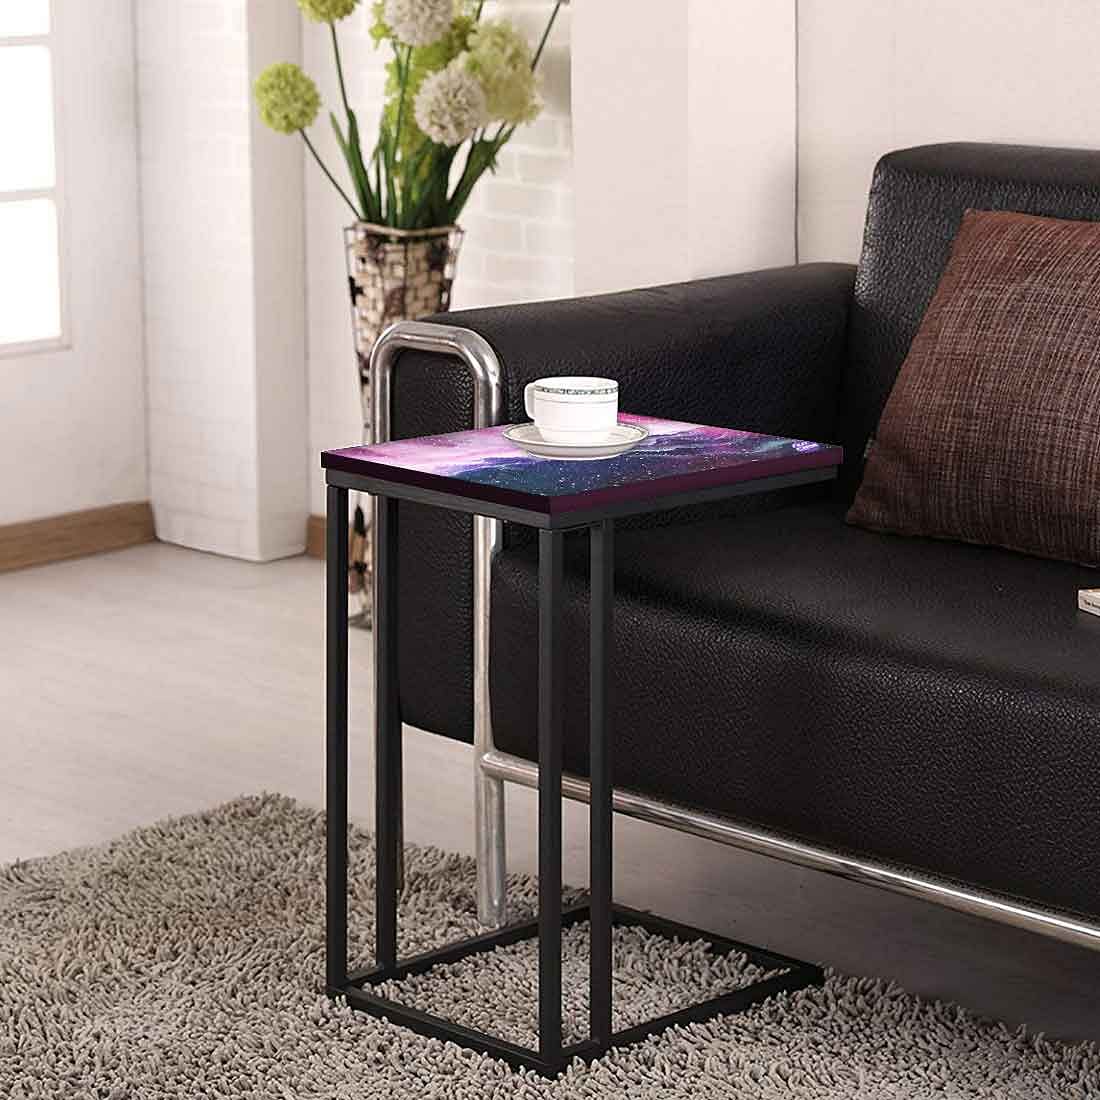 Latest C Shaped End Table - Space Colorful Watercolor Nutcase